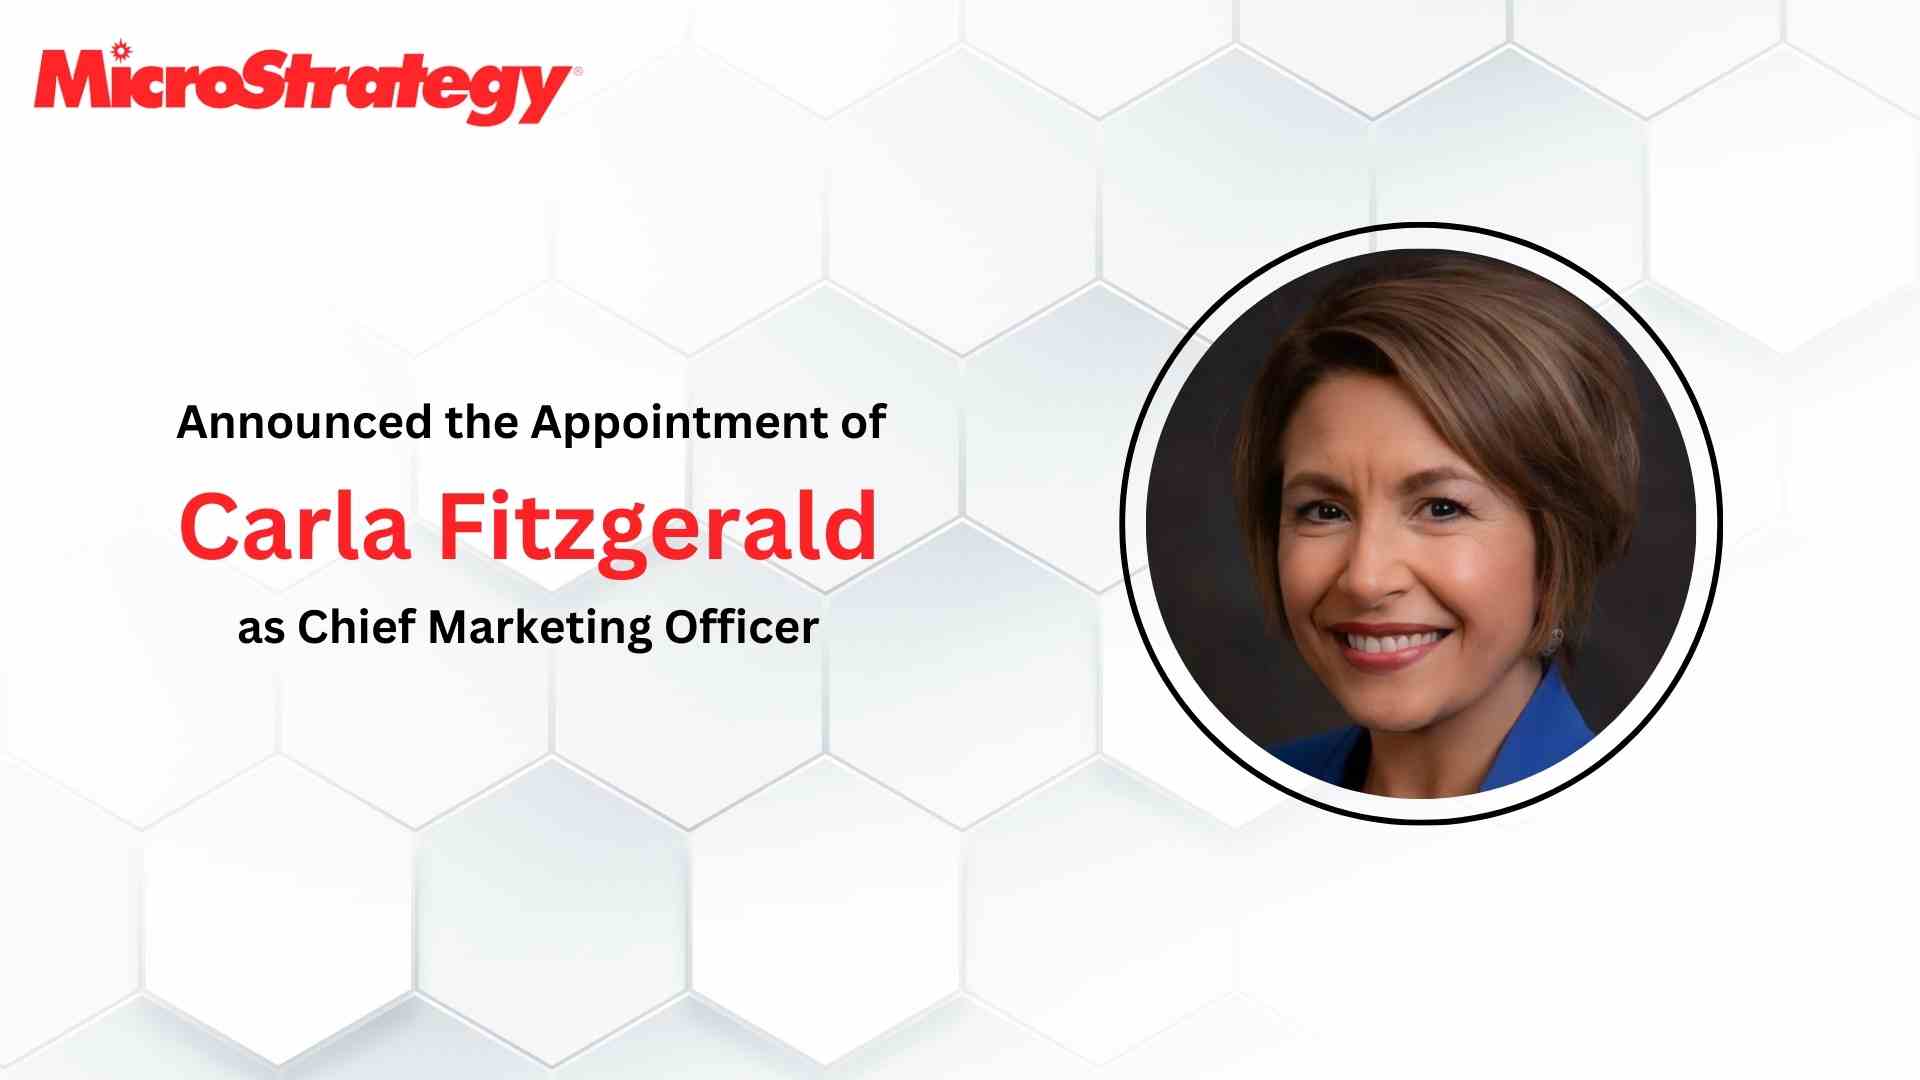 MicroStrategy Appoints Carla Fitzgerald as Chief Marketing Officer